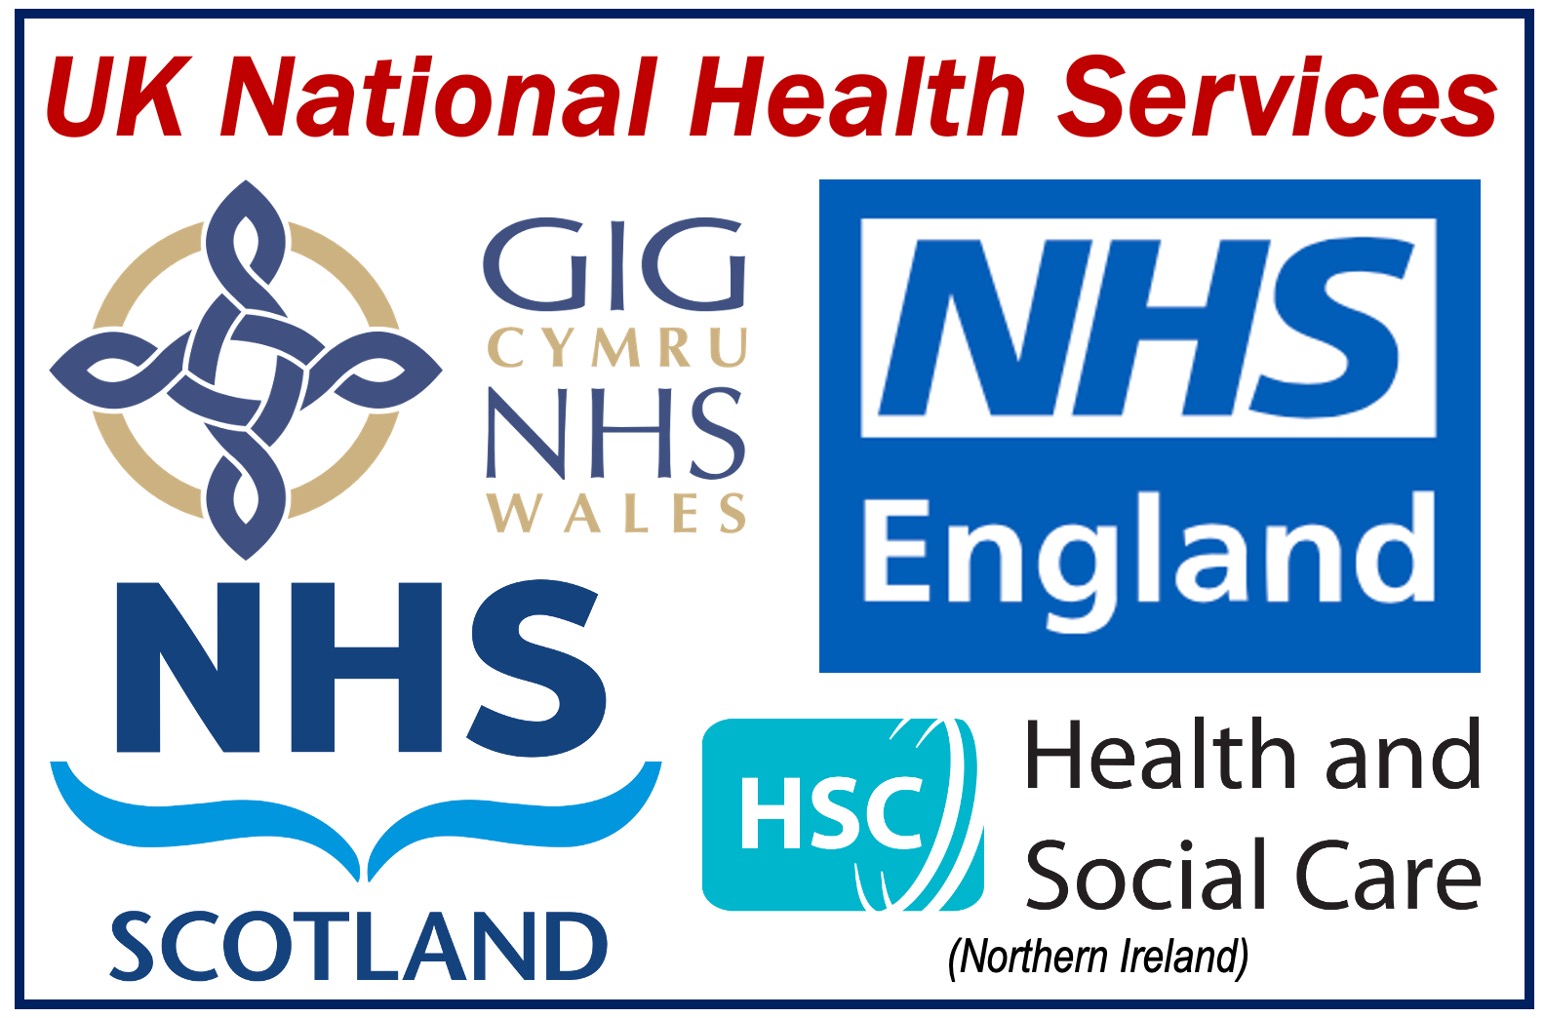 National Health Service or NHS logos for England, Scotland, Wales, and Northern Ireland.